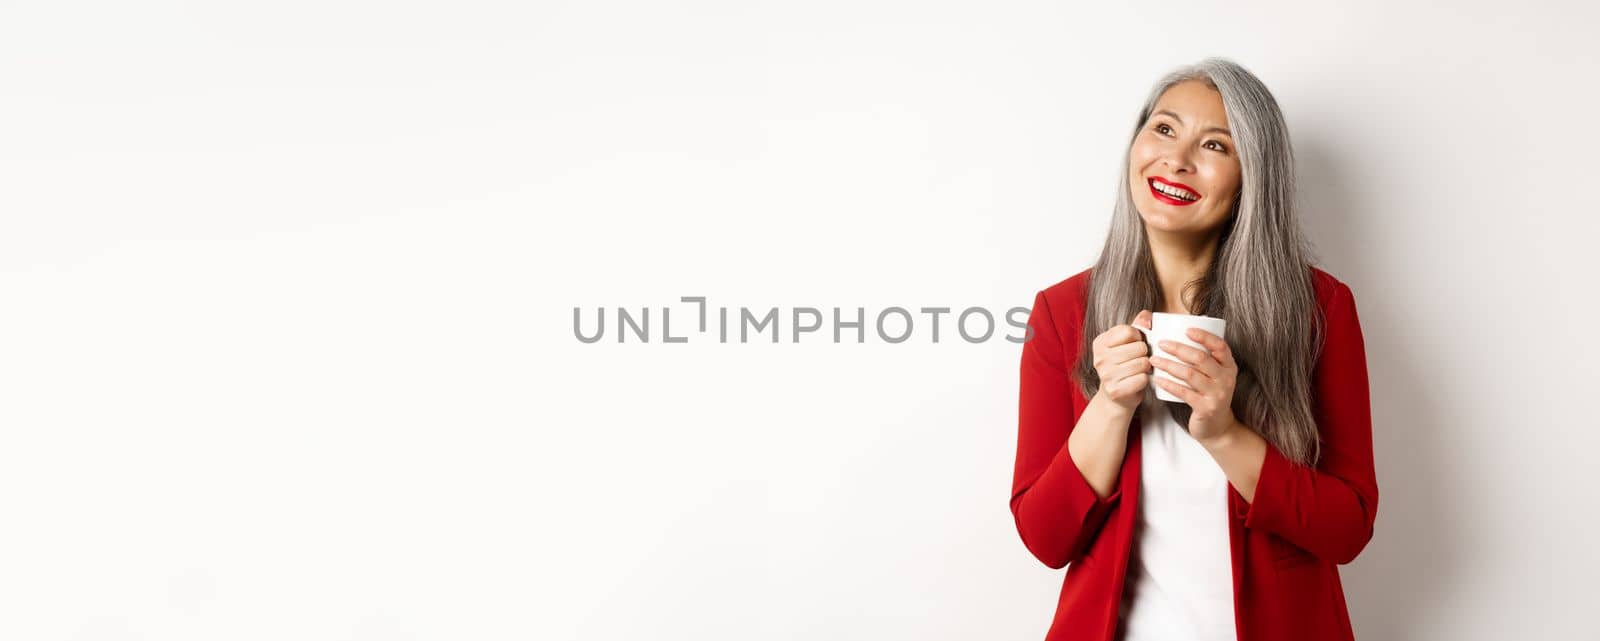 Business people concept. Smiling asian businesswoman having coffee break, holding warm mug and looking upper left corner dreamy, white background.